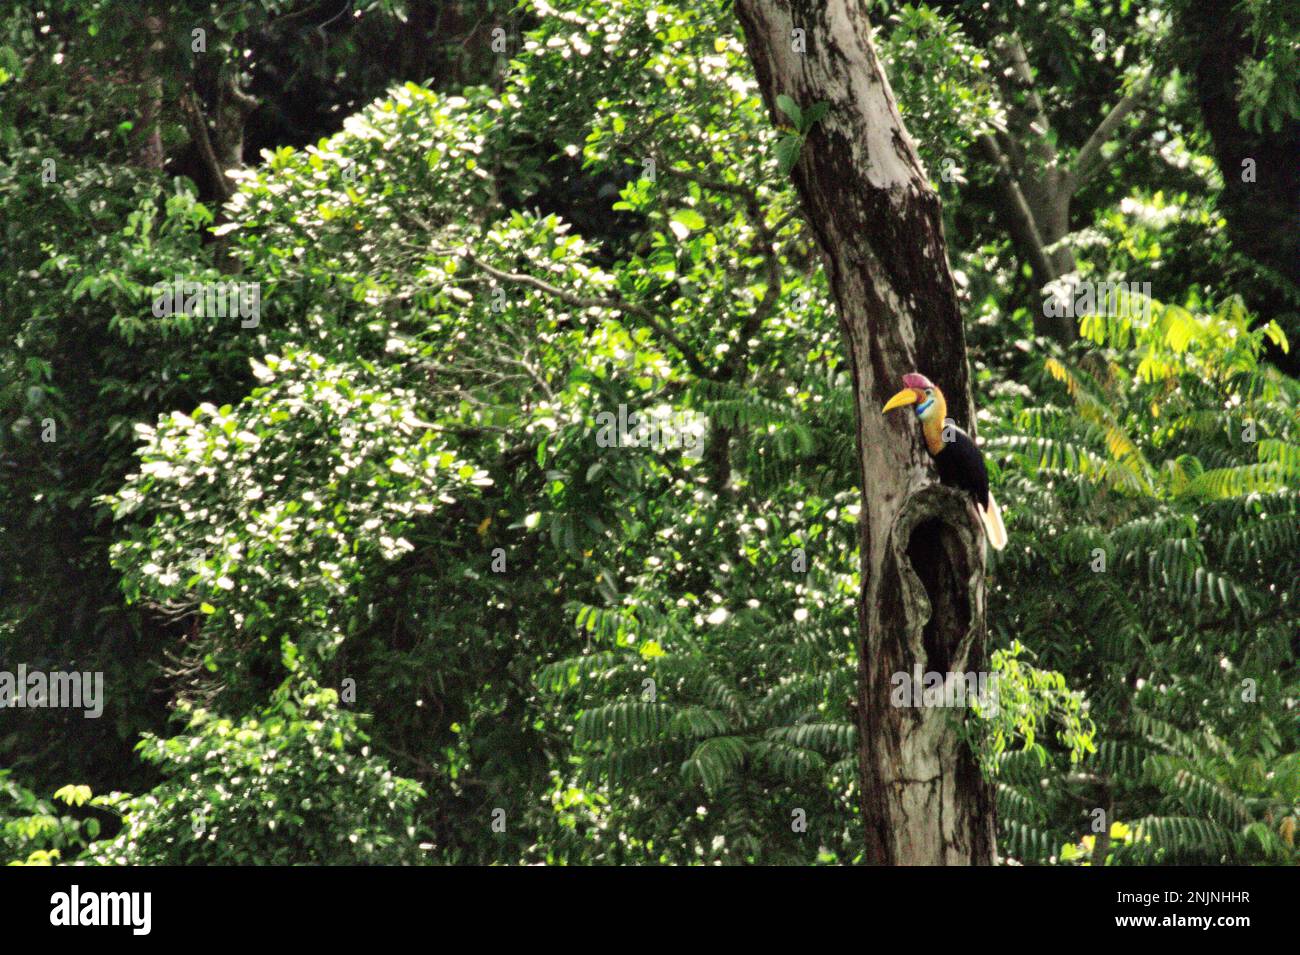 A male individual of knobbed hornbill, or sometimes called Sulawesi wrinkled hornbill (Rhyticeros cassidix), is perching above a potential nesting hole on a tree in rainforest near Mount Tangkoko and DuaSudara in Bitung, North Sulawesi, Indonesia. Due to their dependency on forest and certain types of trees, hornbills in general are threatened by climate change.   'There is rapidly growing evidence for the negative effects of high temperatures on the behavior, physiology, breeding, and survival of various bird, mammal, and reptile species around the world,' said Dr. Nicholas Pattinson,... Stock Photo